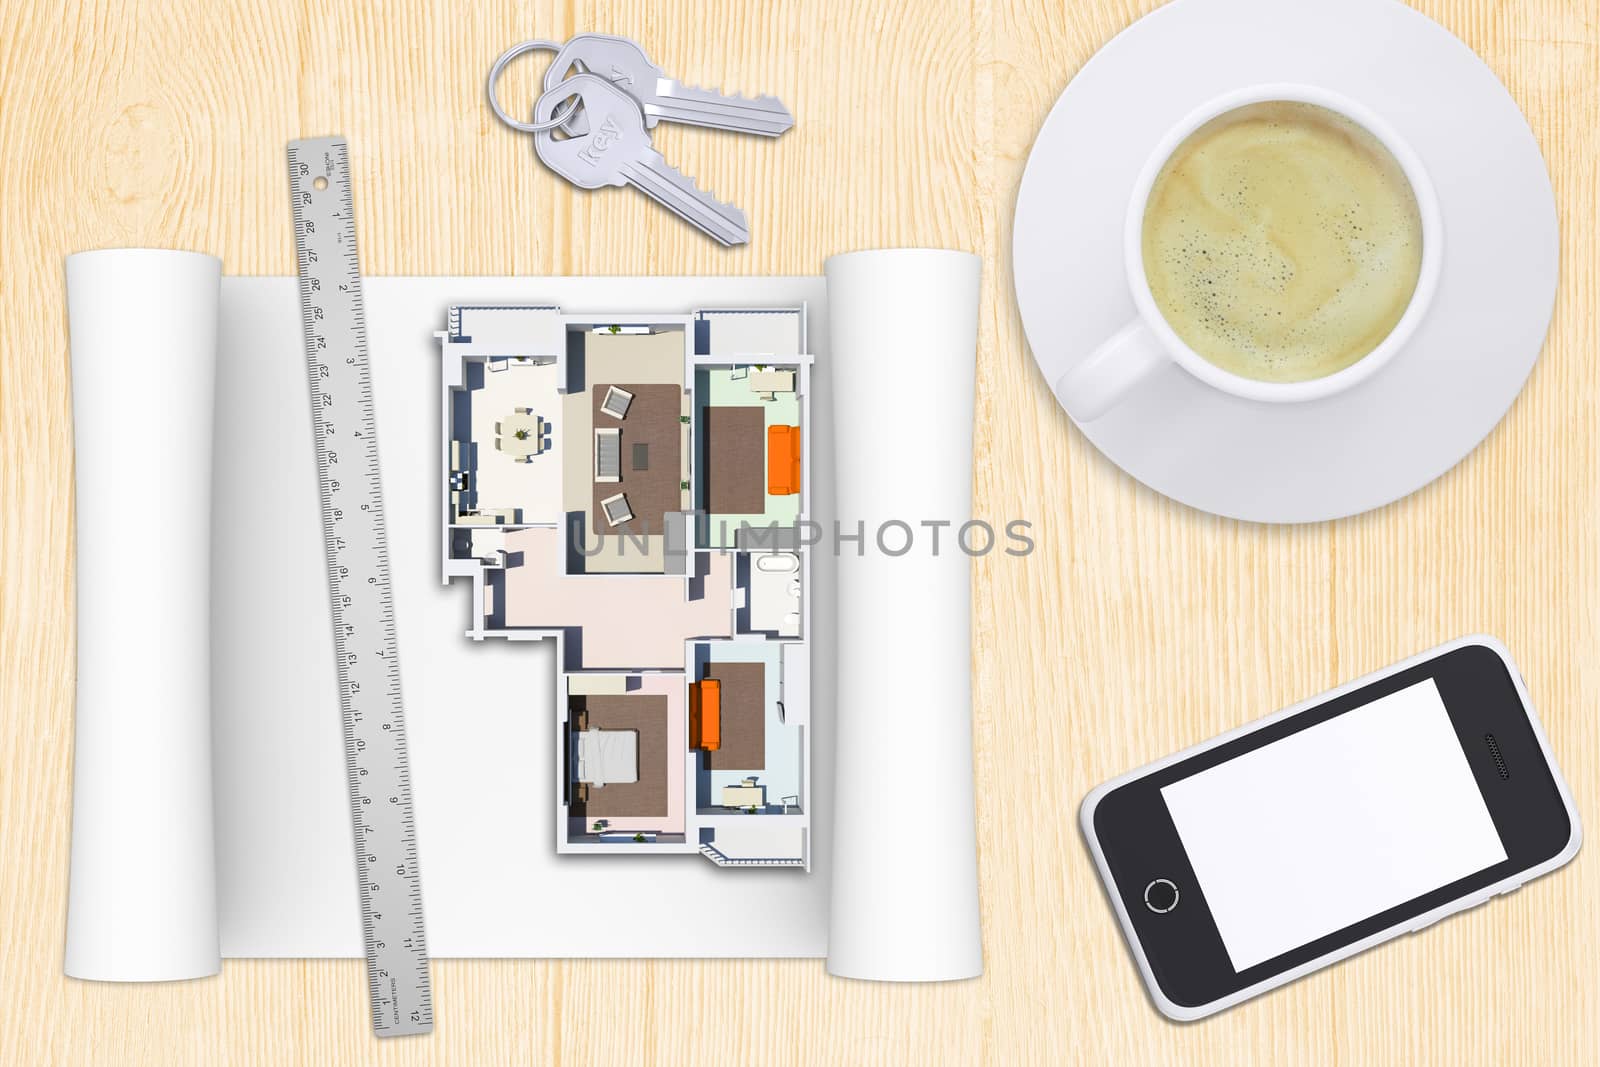 Model plan of flat with smartphone on wooden table with coffee